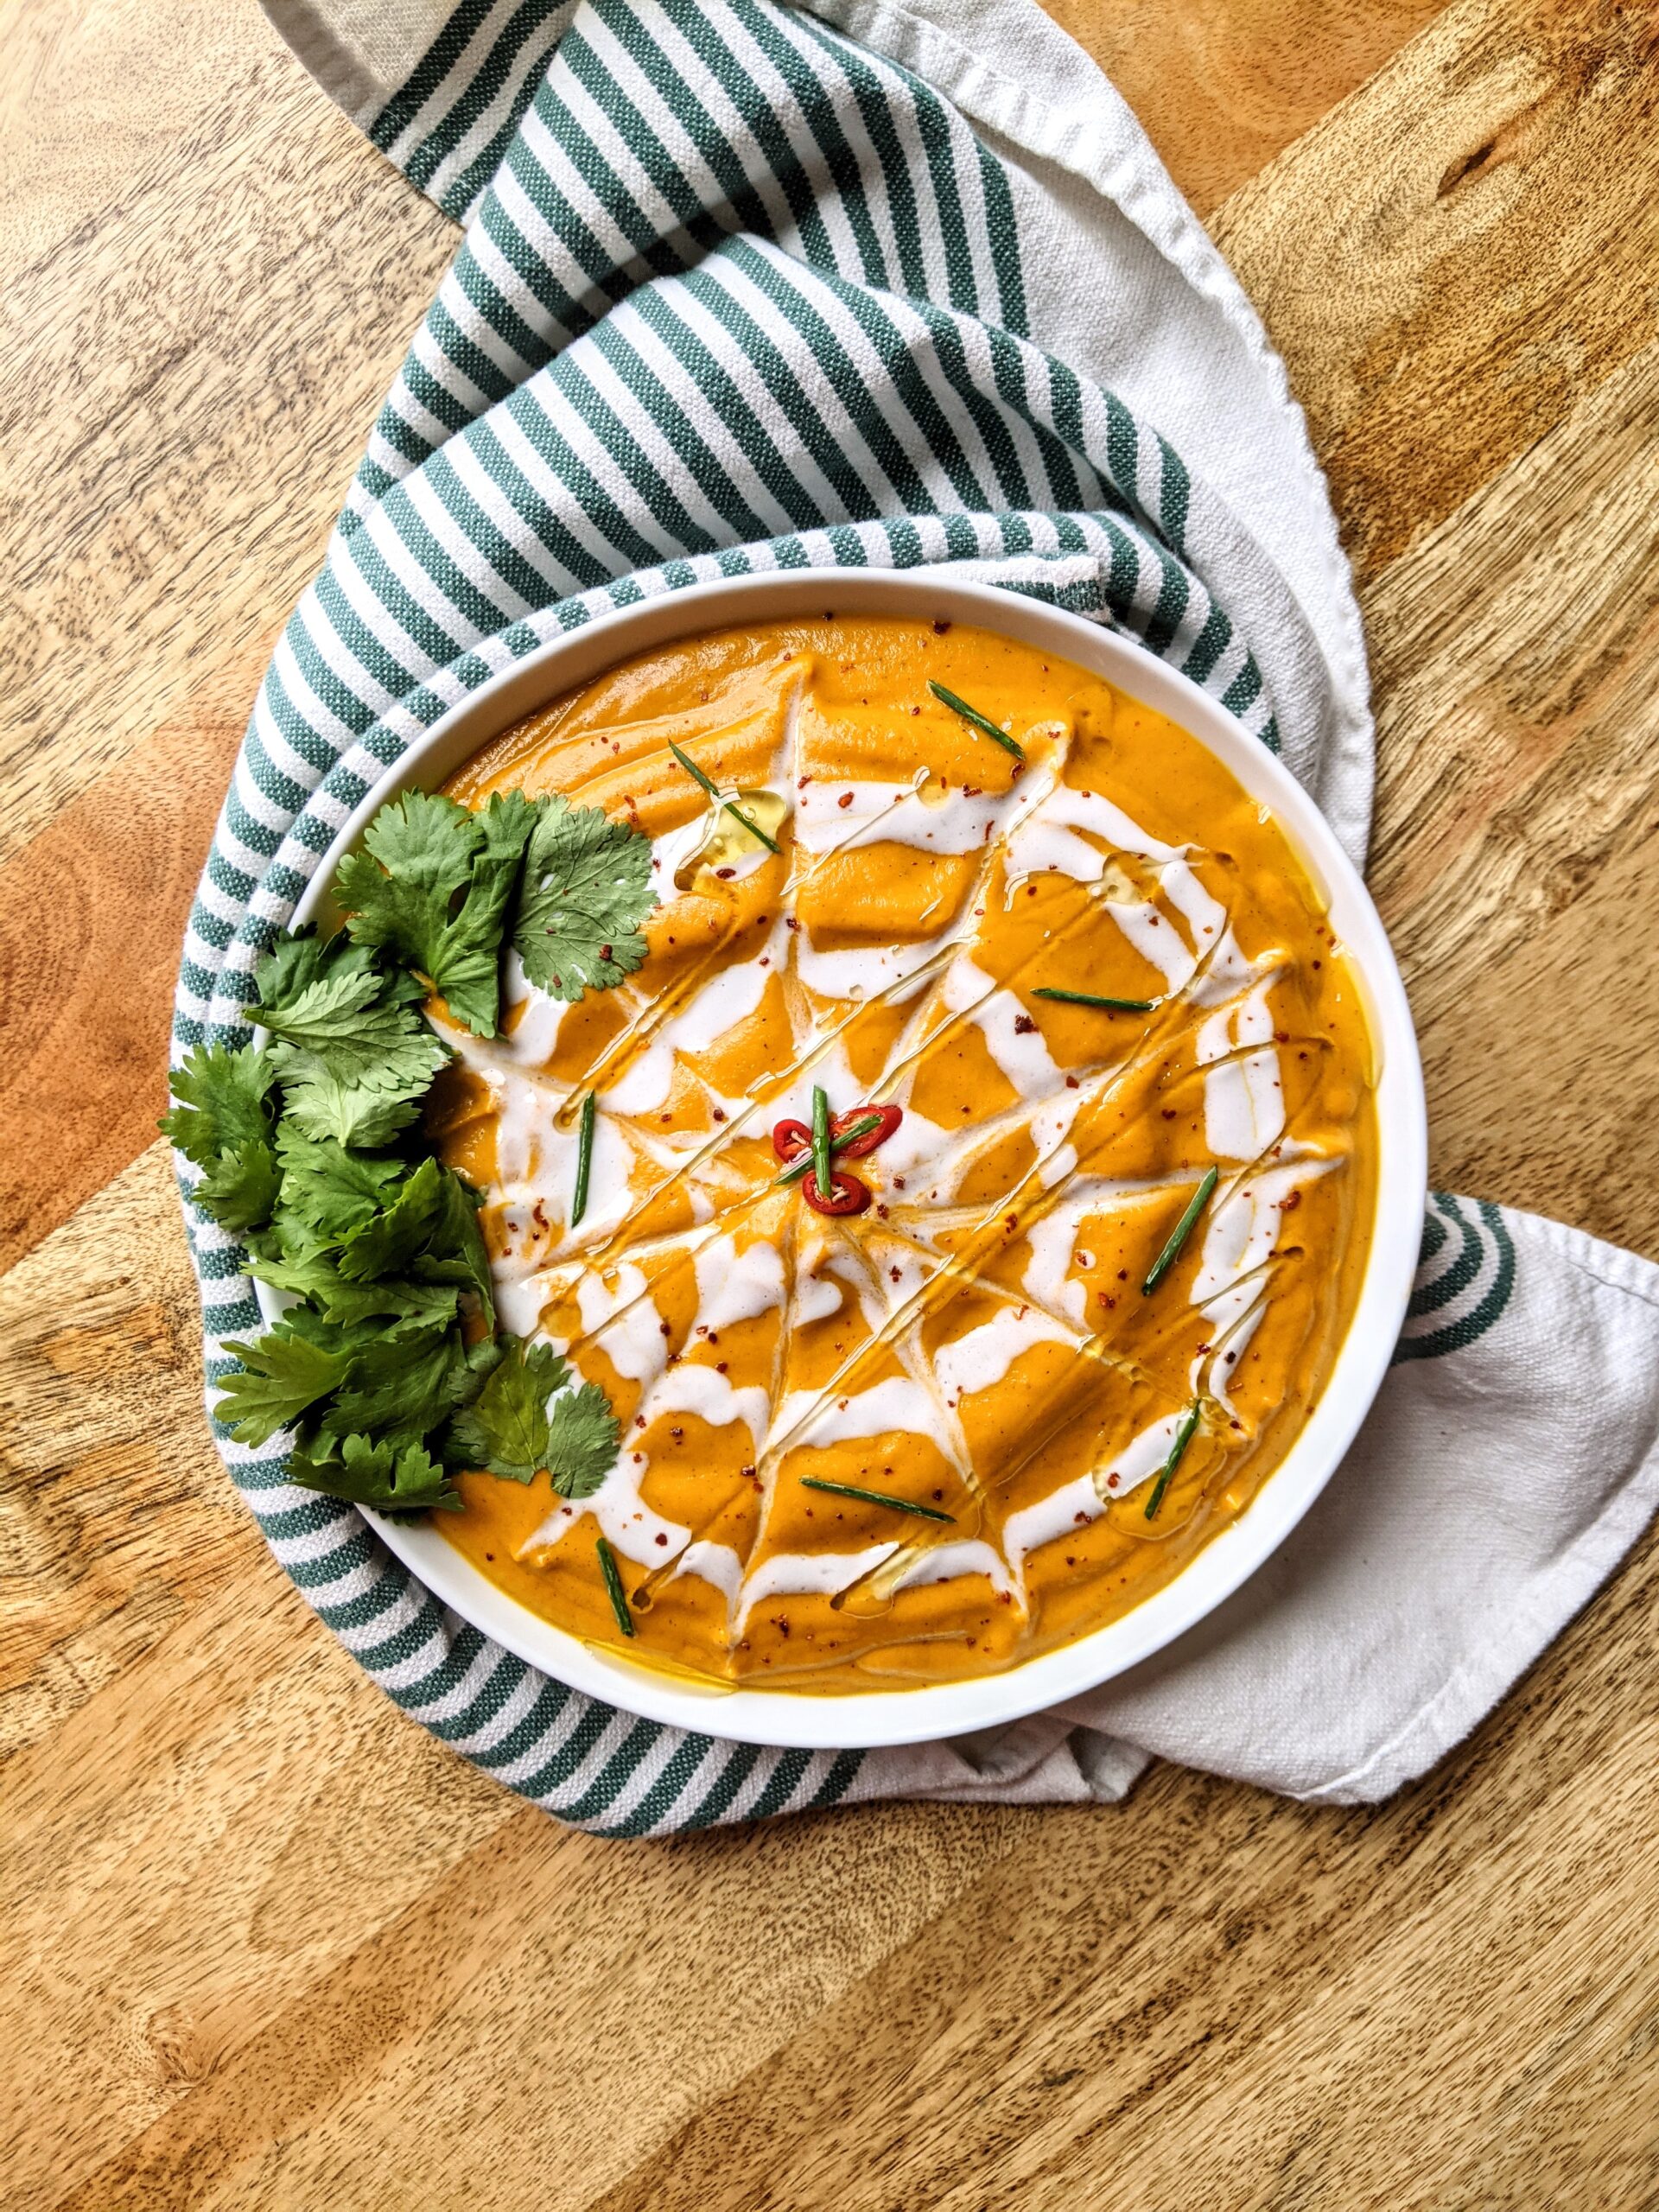 A bowl of vibrant orange carrot coconut curry soup, with an intricate spider web-like design of coconut cream, garnished with fresh cilantro, chives, and sliced Thai chili.